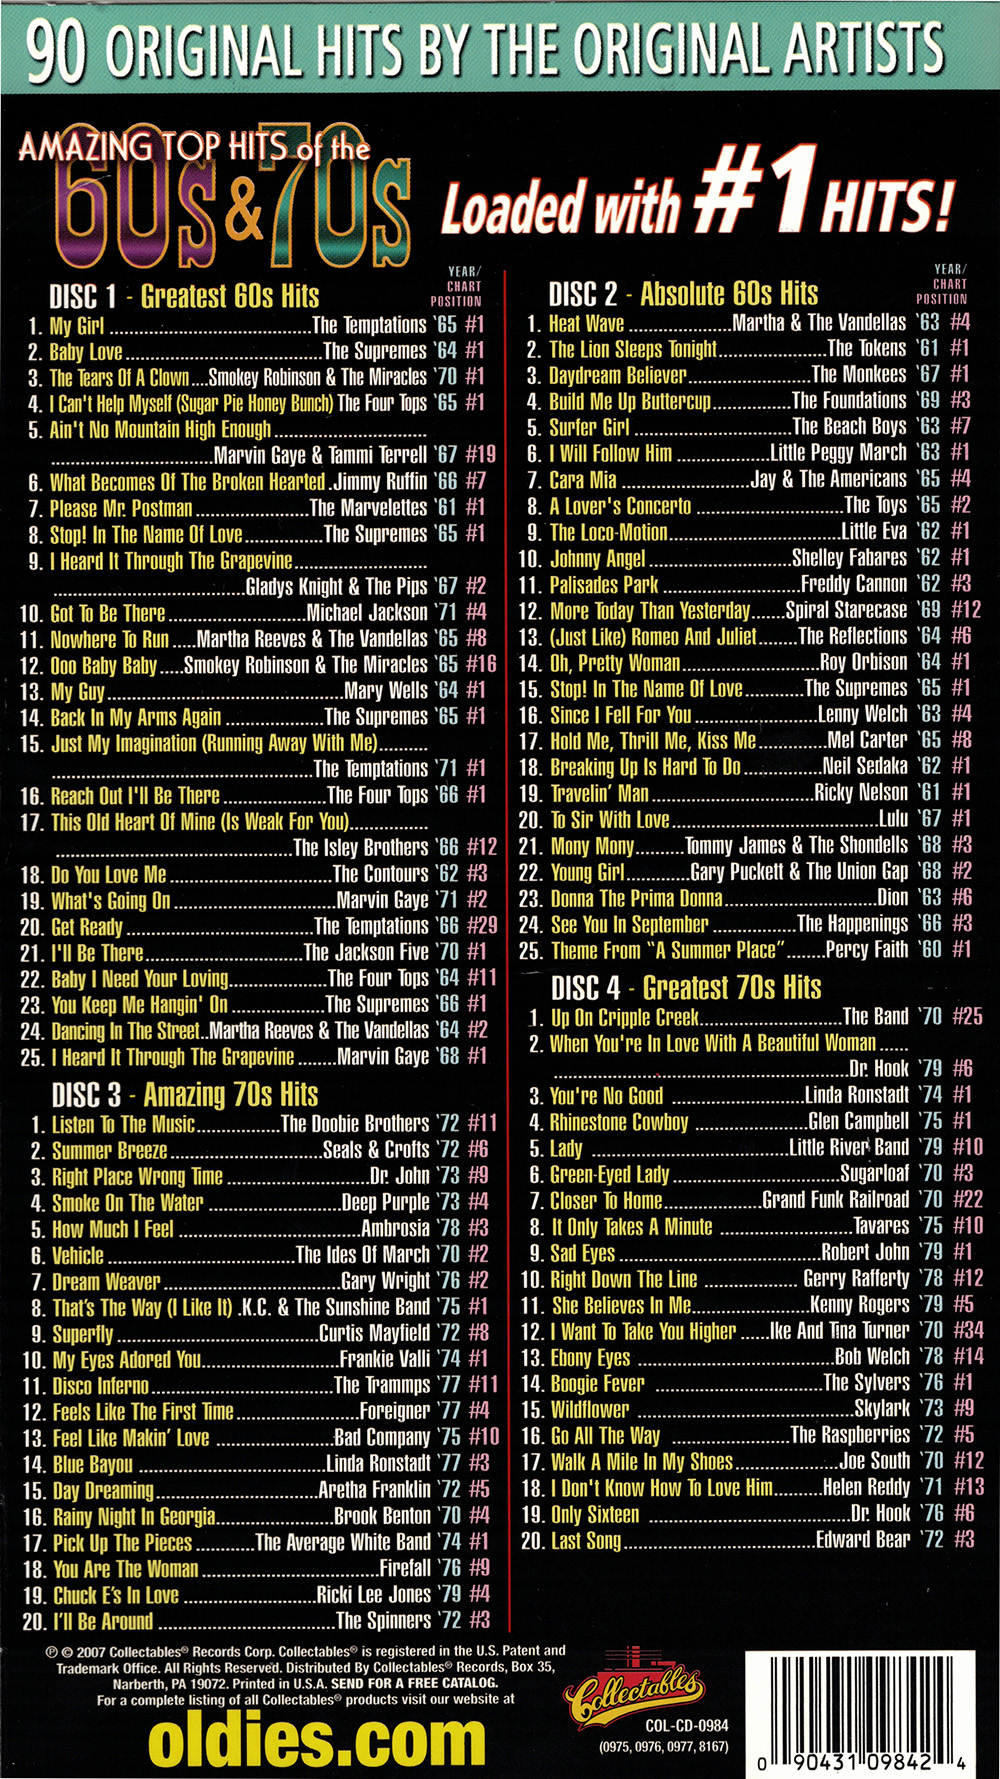 Amazing Top Hits Of The 60's & 70's (4 CD)